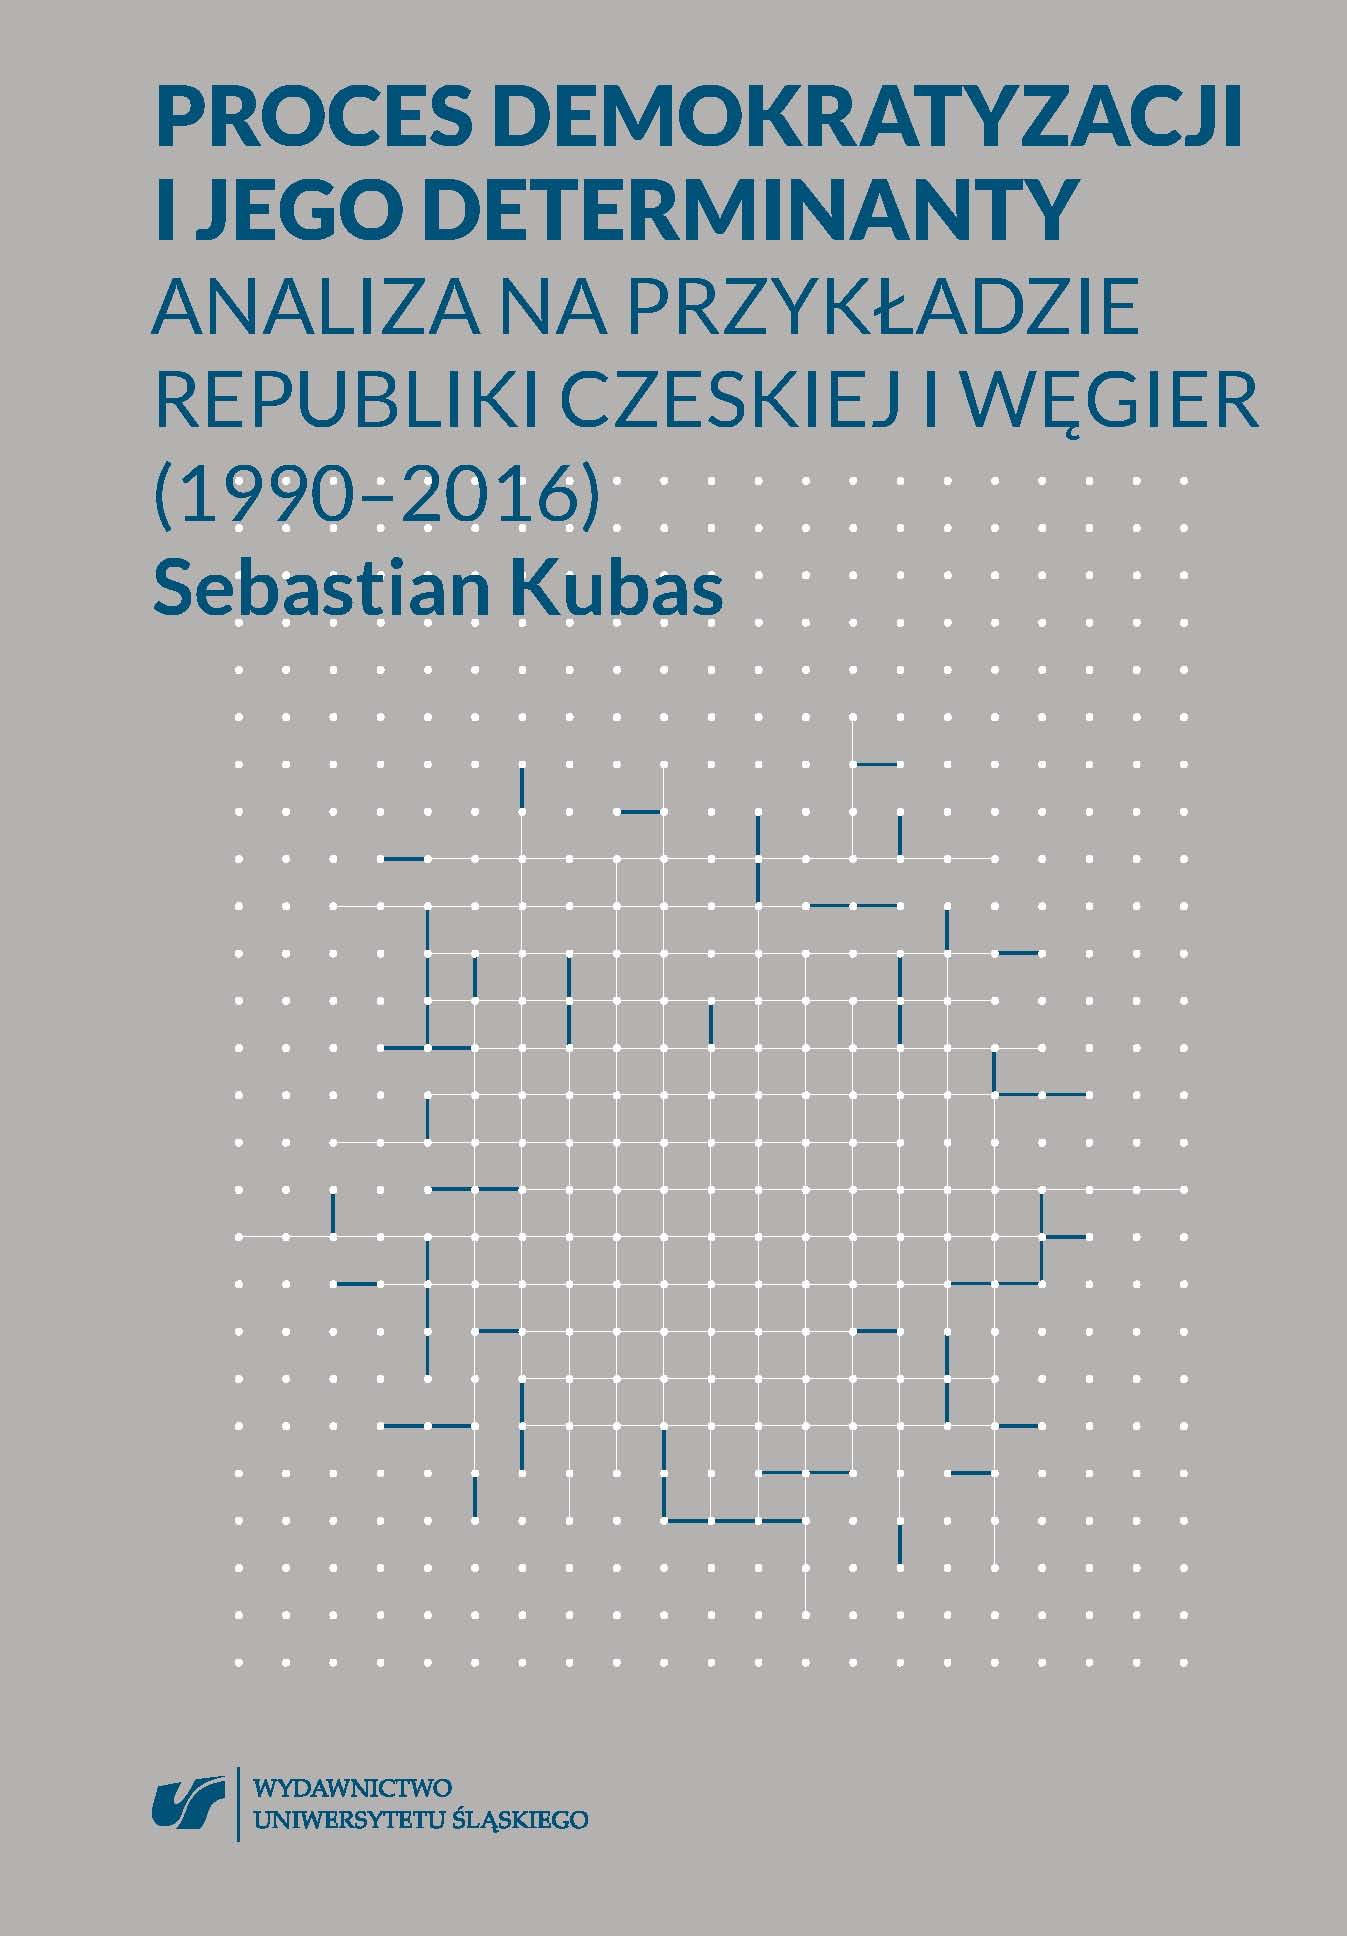 The process of democratisation and its determinants. An analysis based on the example of the Czech Republic and Hungary (1999–2016)